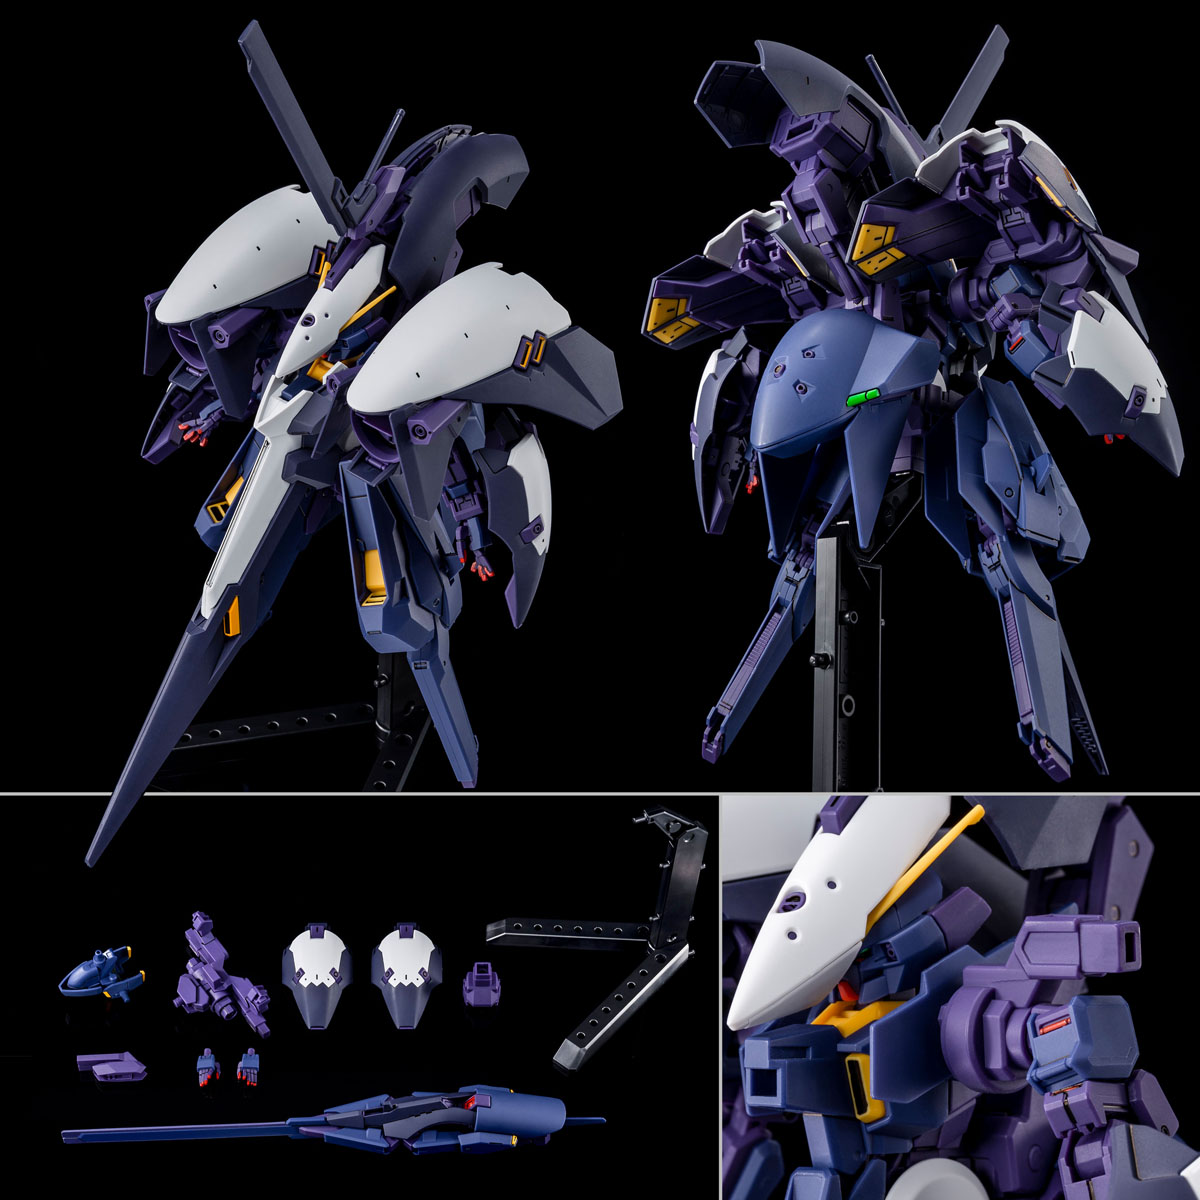 Mg Mobile Suit Gundam Z Advance Of Z To The Original Flag Of Titans 1 100 G Toys Hobbies Models Kits